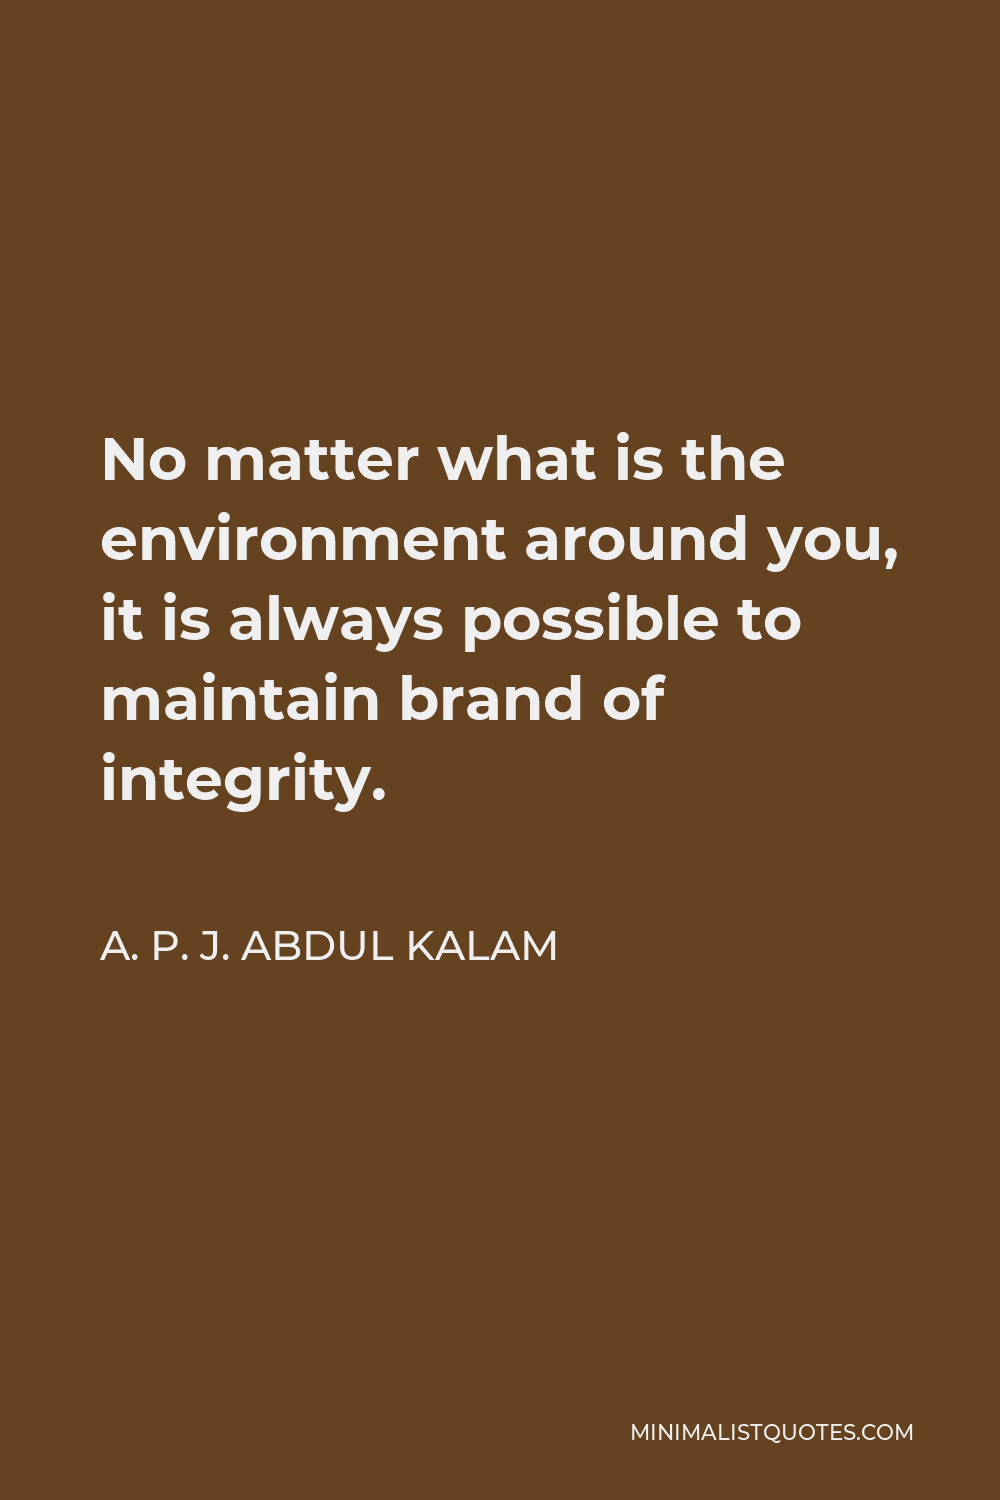 A. P. J. Abdul Kalam Quote - No matter what is the environment around you, it is always possible to maintain brand of integrity.